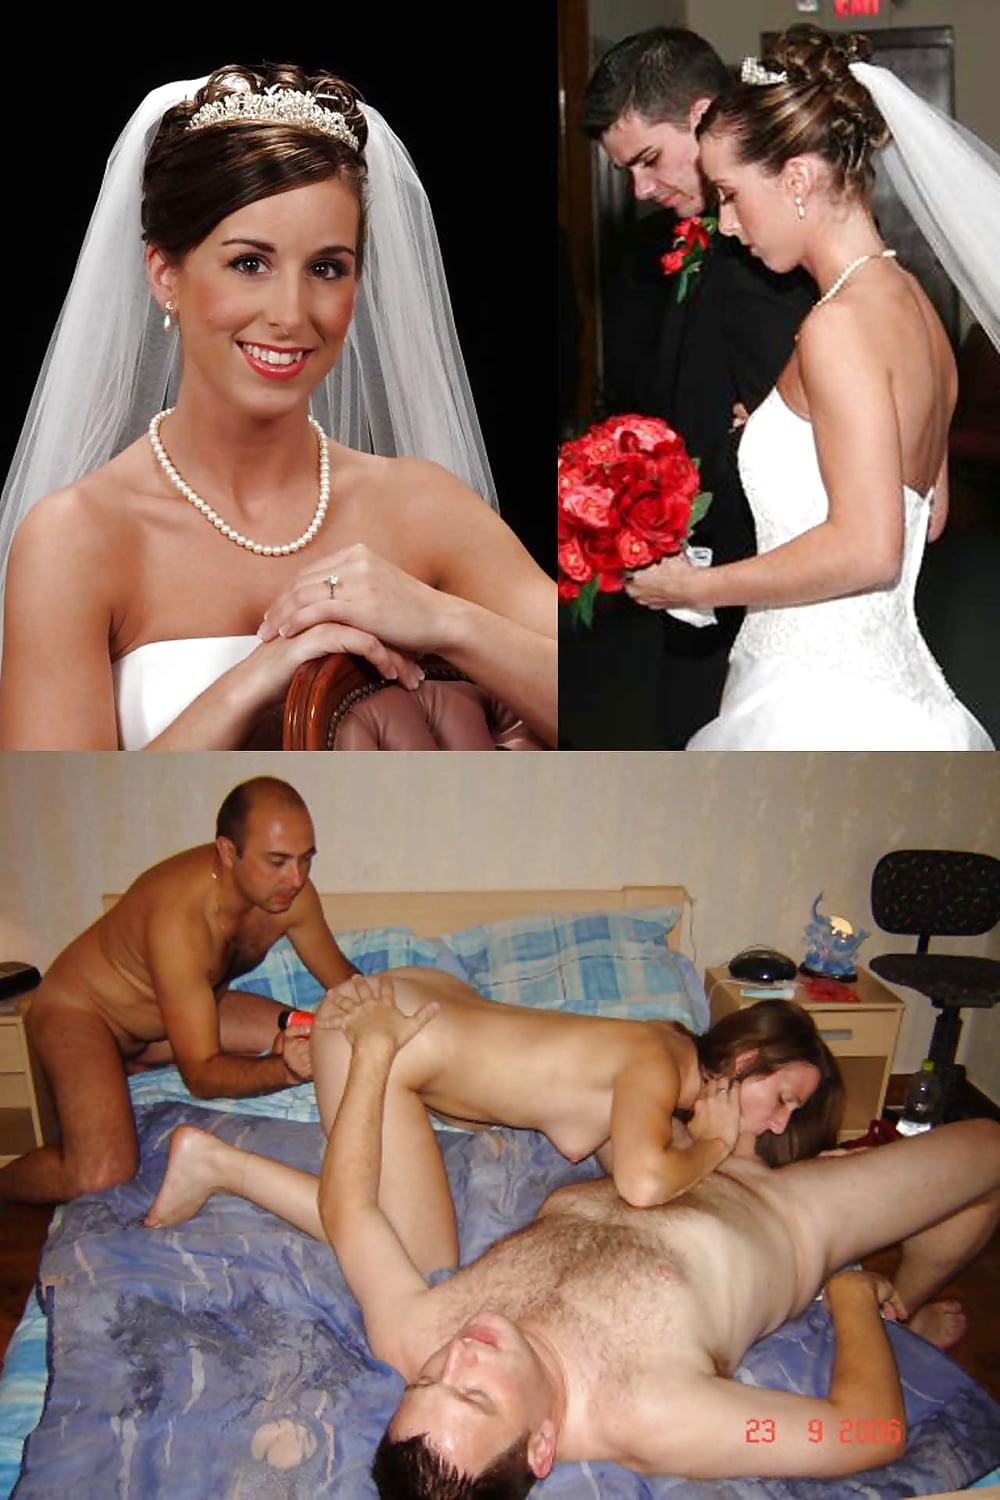 Married Porn - Frank Married Couples (59 photos) - motherless porn pics